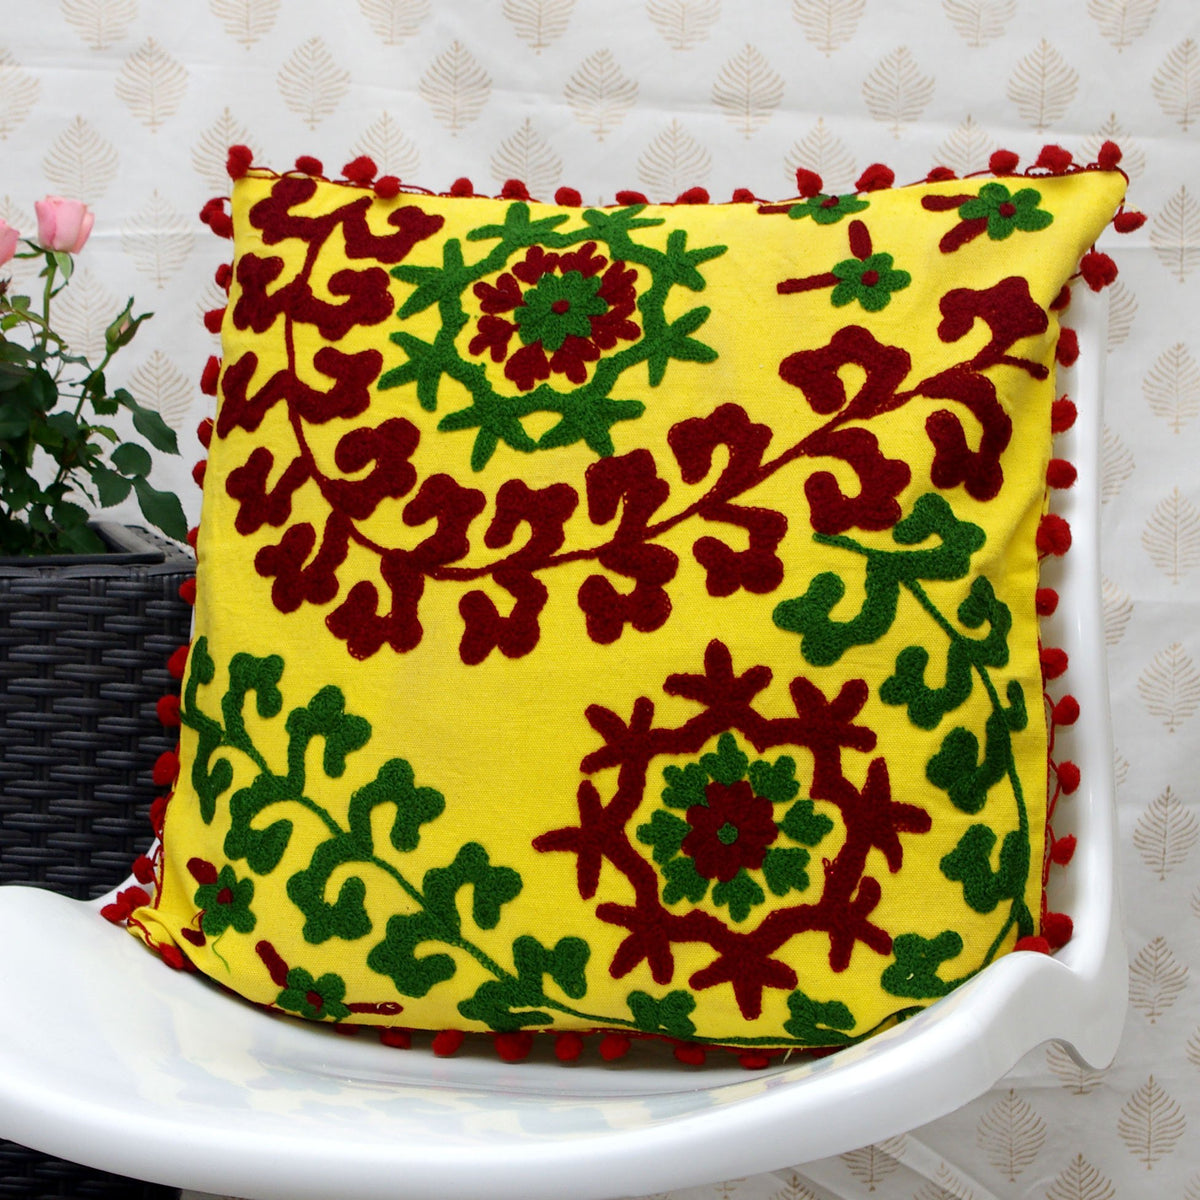 Decorative Suzani Floral Print & Woolen Embroidered Cotton Cushion Cover With Pom Pom Design 12 - Kantha Decor